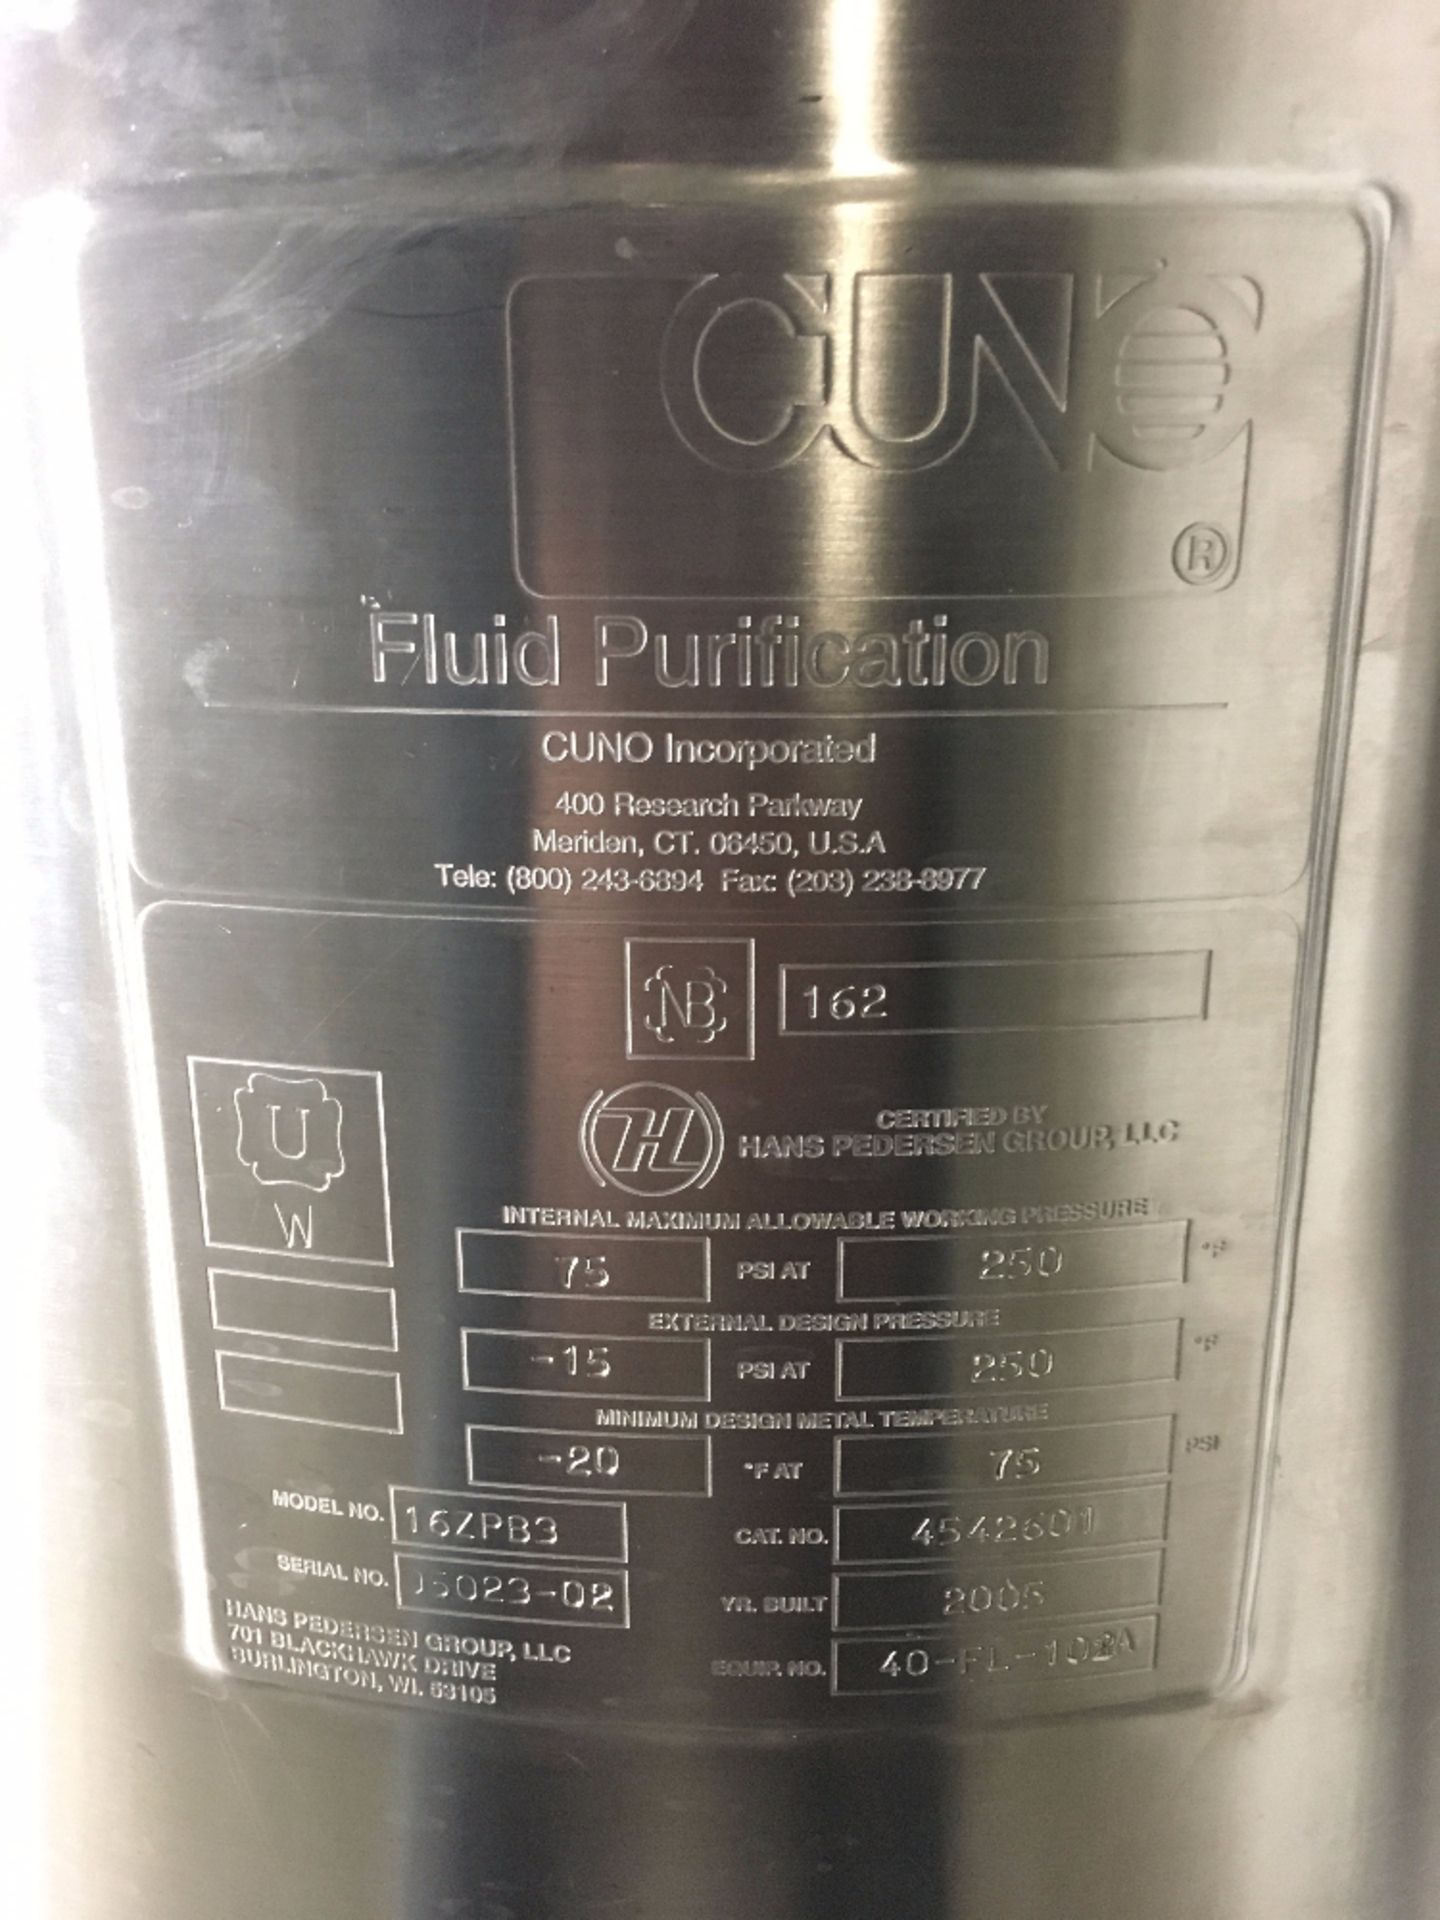 Fluid Purification 16ZPB3 Stainless Steel Filter Housing - Image 2 of 2